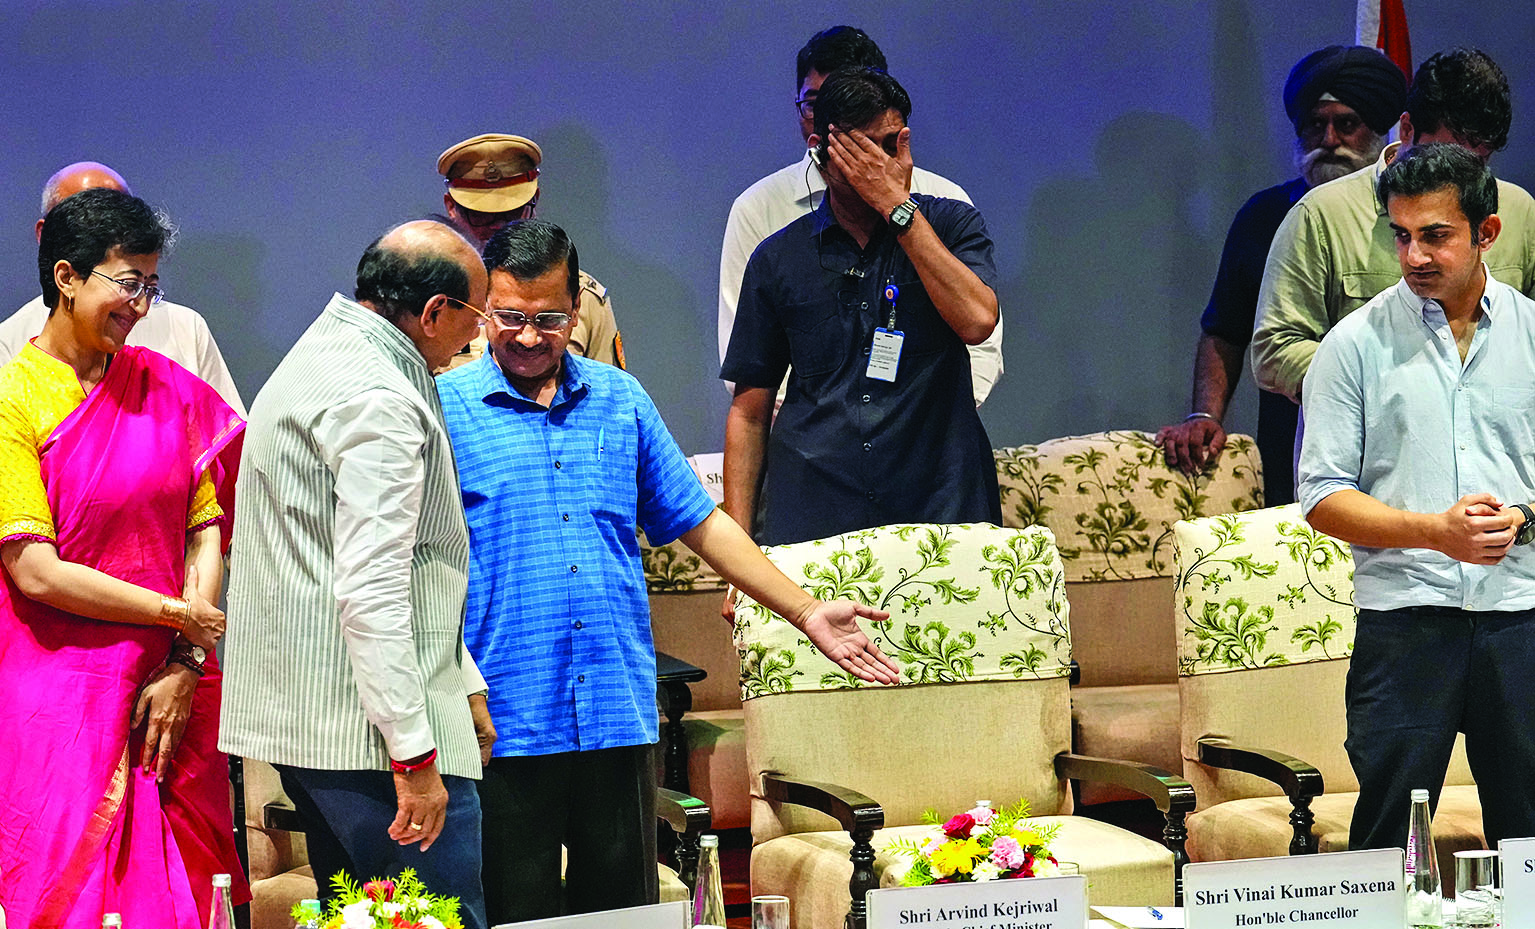 If sloganeering could improve edu system,   it would have in last 70 years: CM Kejriwal